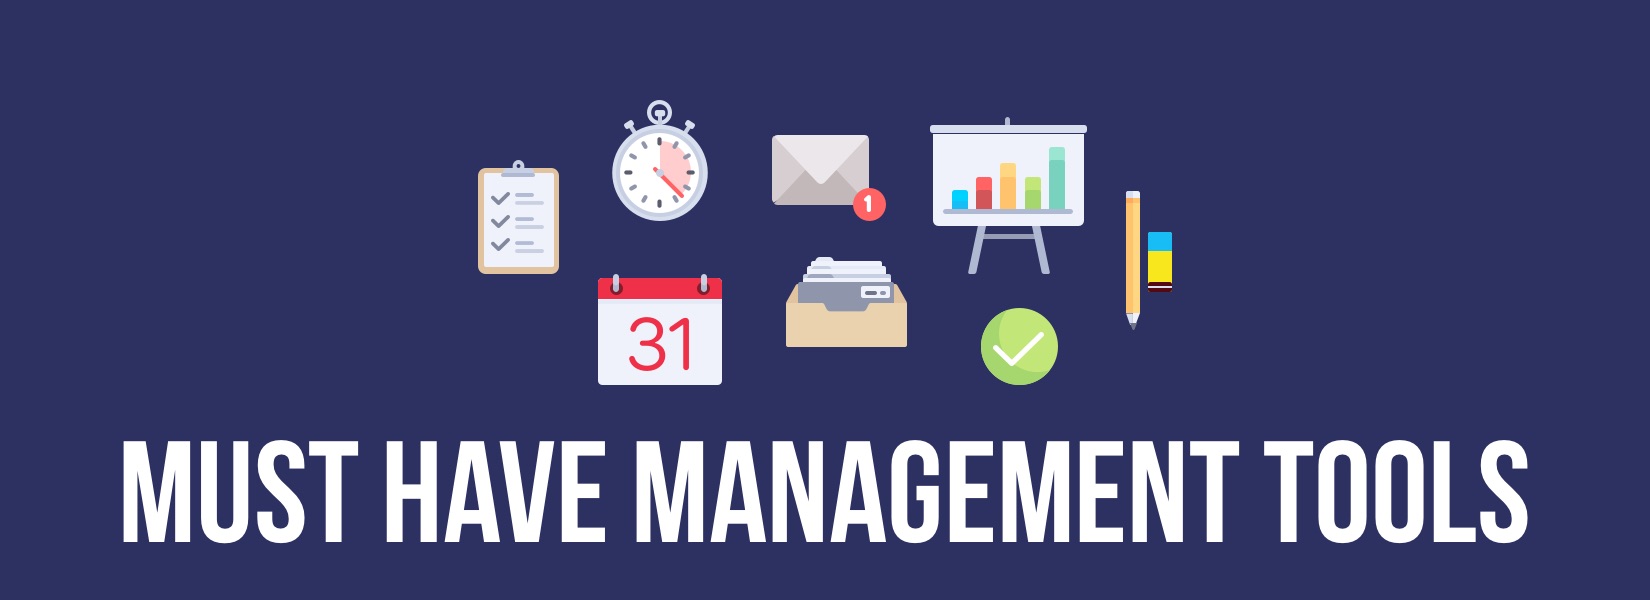 Must have Management tools